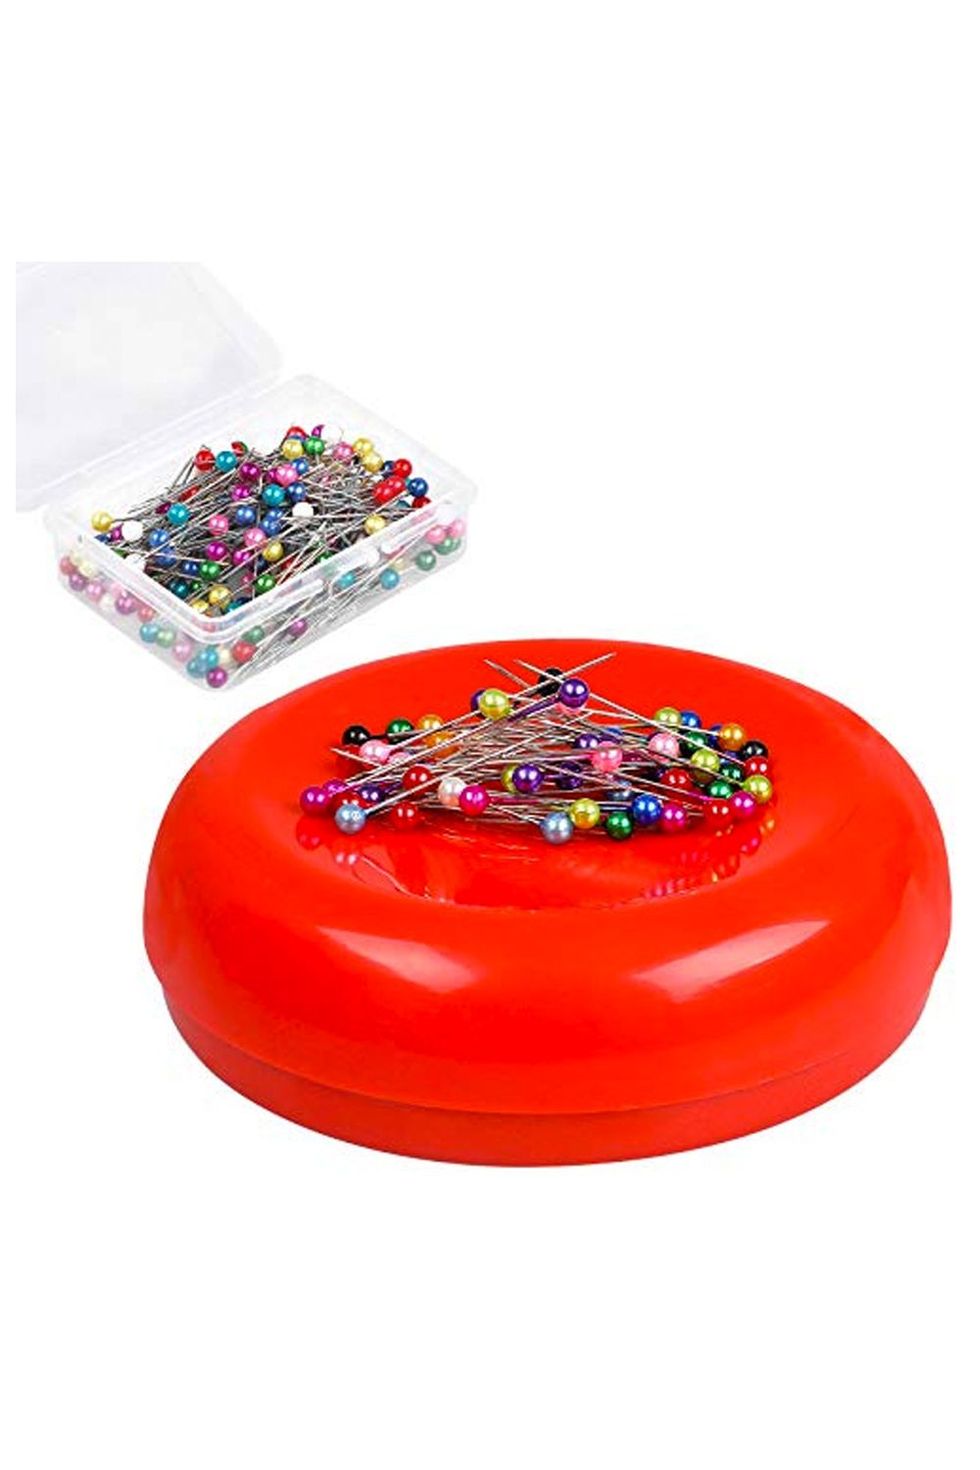 Phinus Magnetic Pin Cushion with 200 Pins